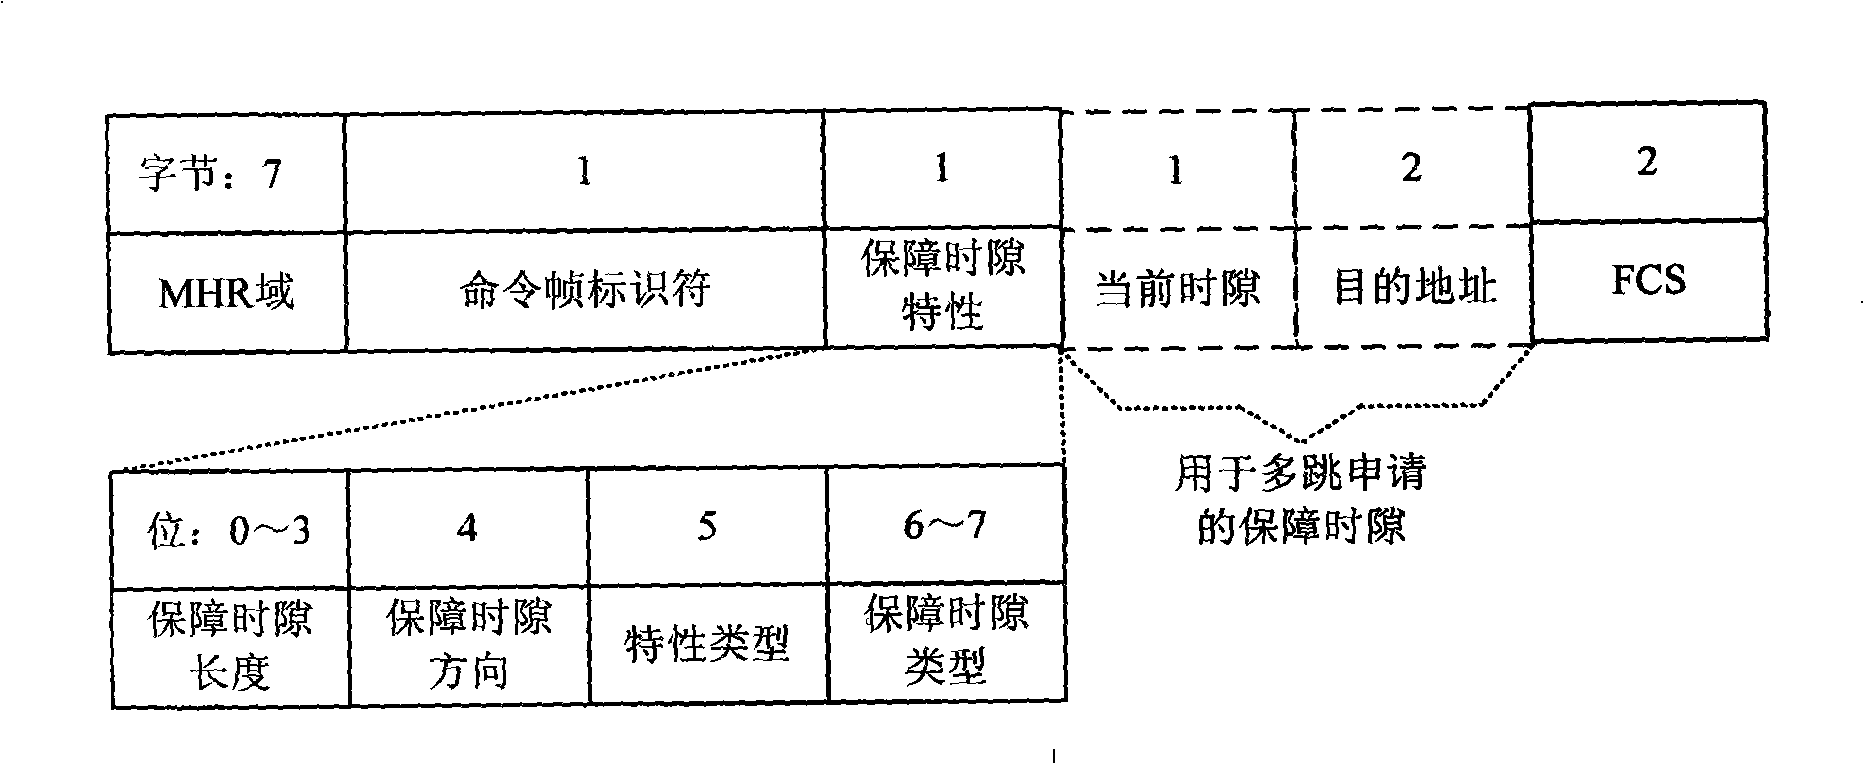 Determined communication scheduling method of industrial wireless network